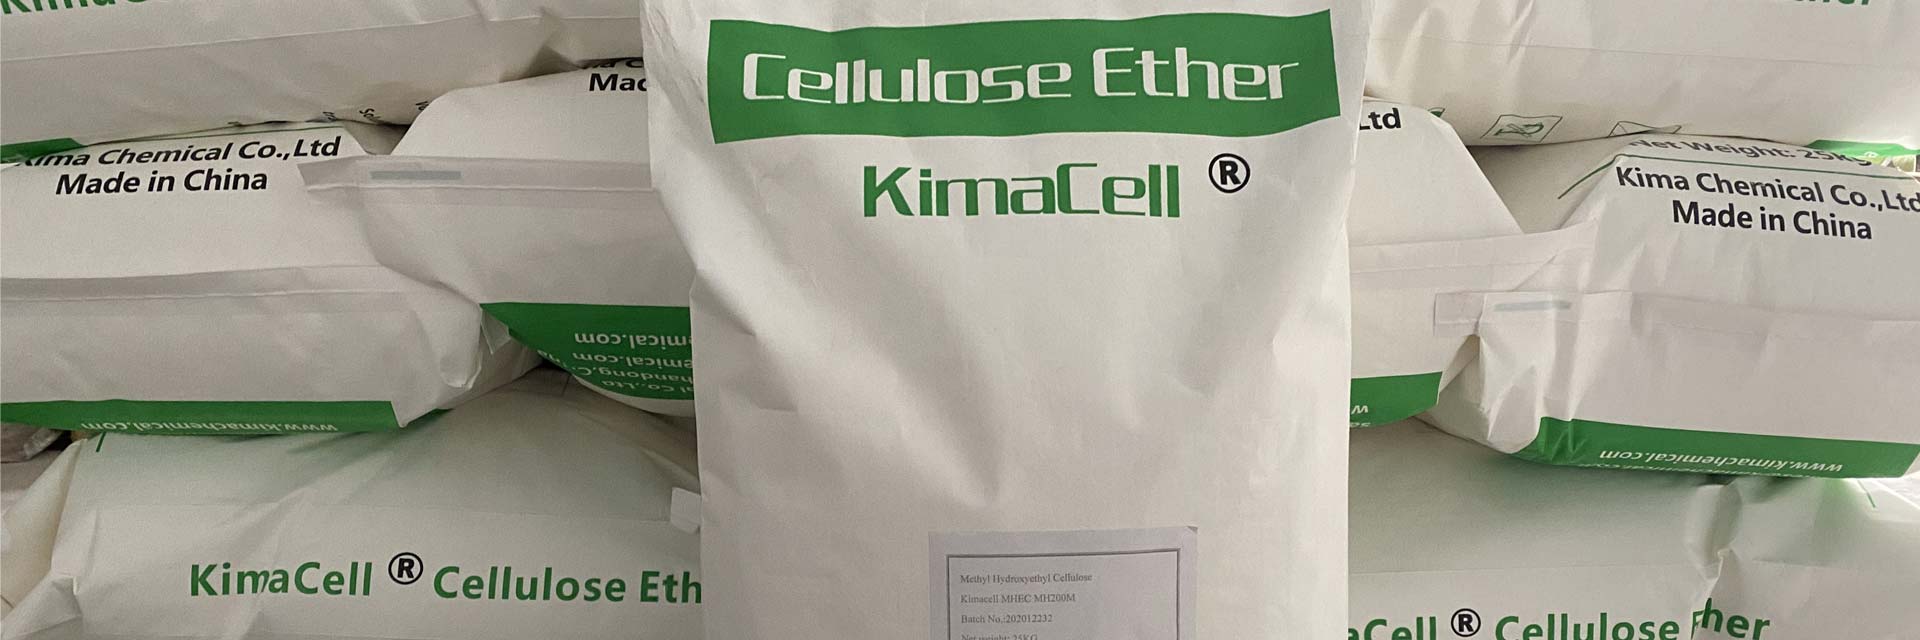 Cellulose Ethers